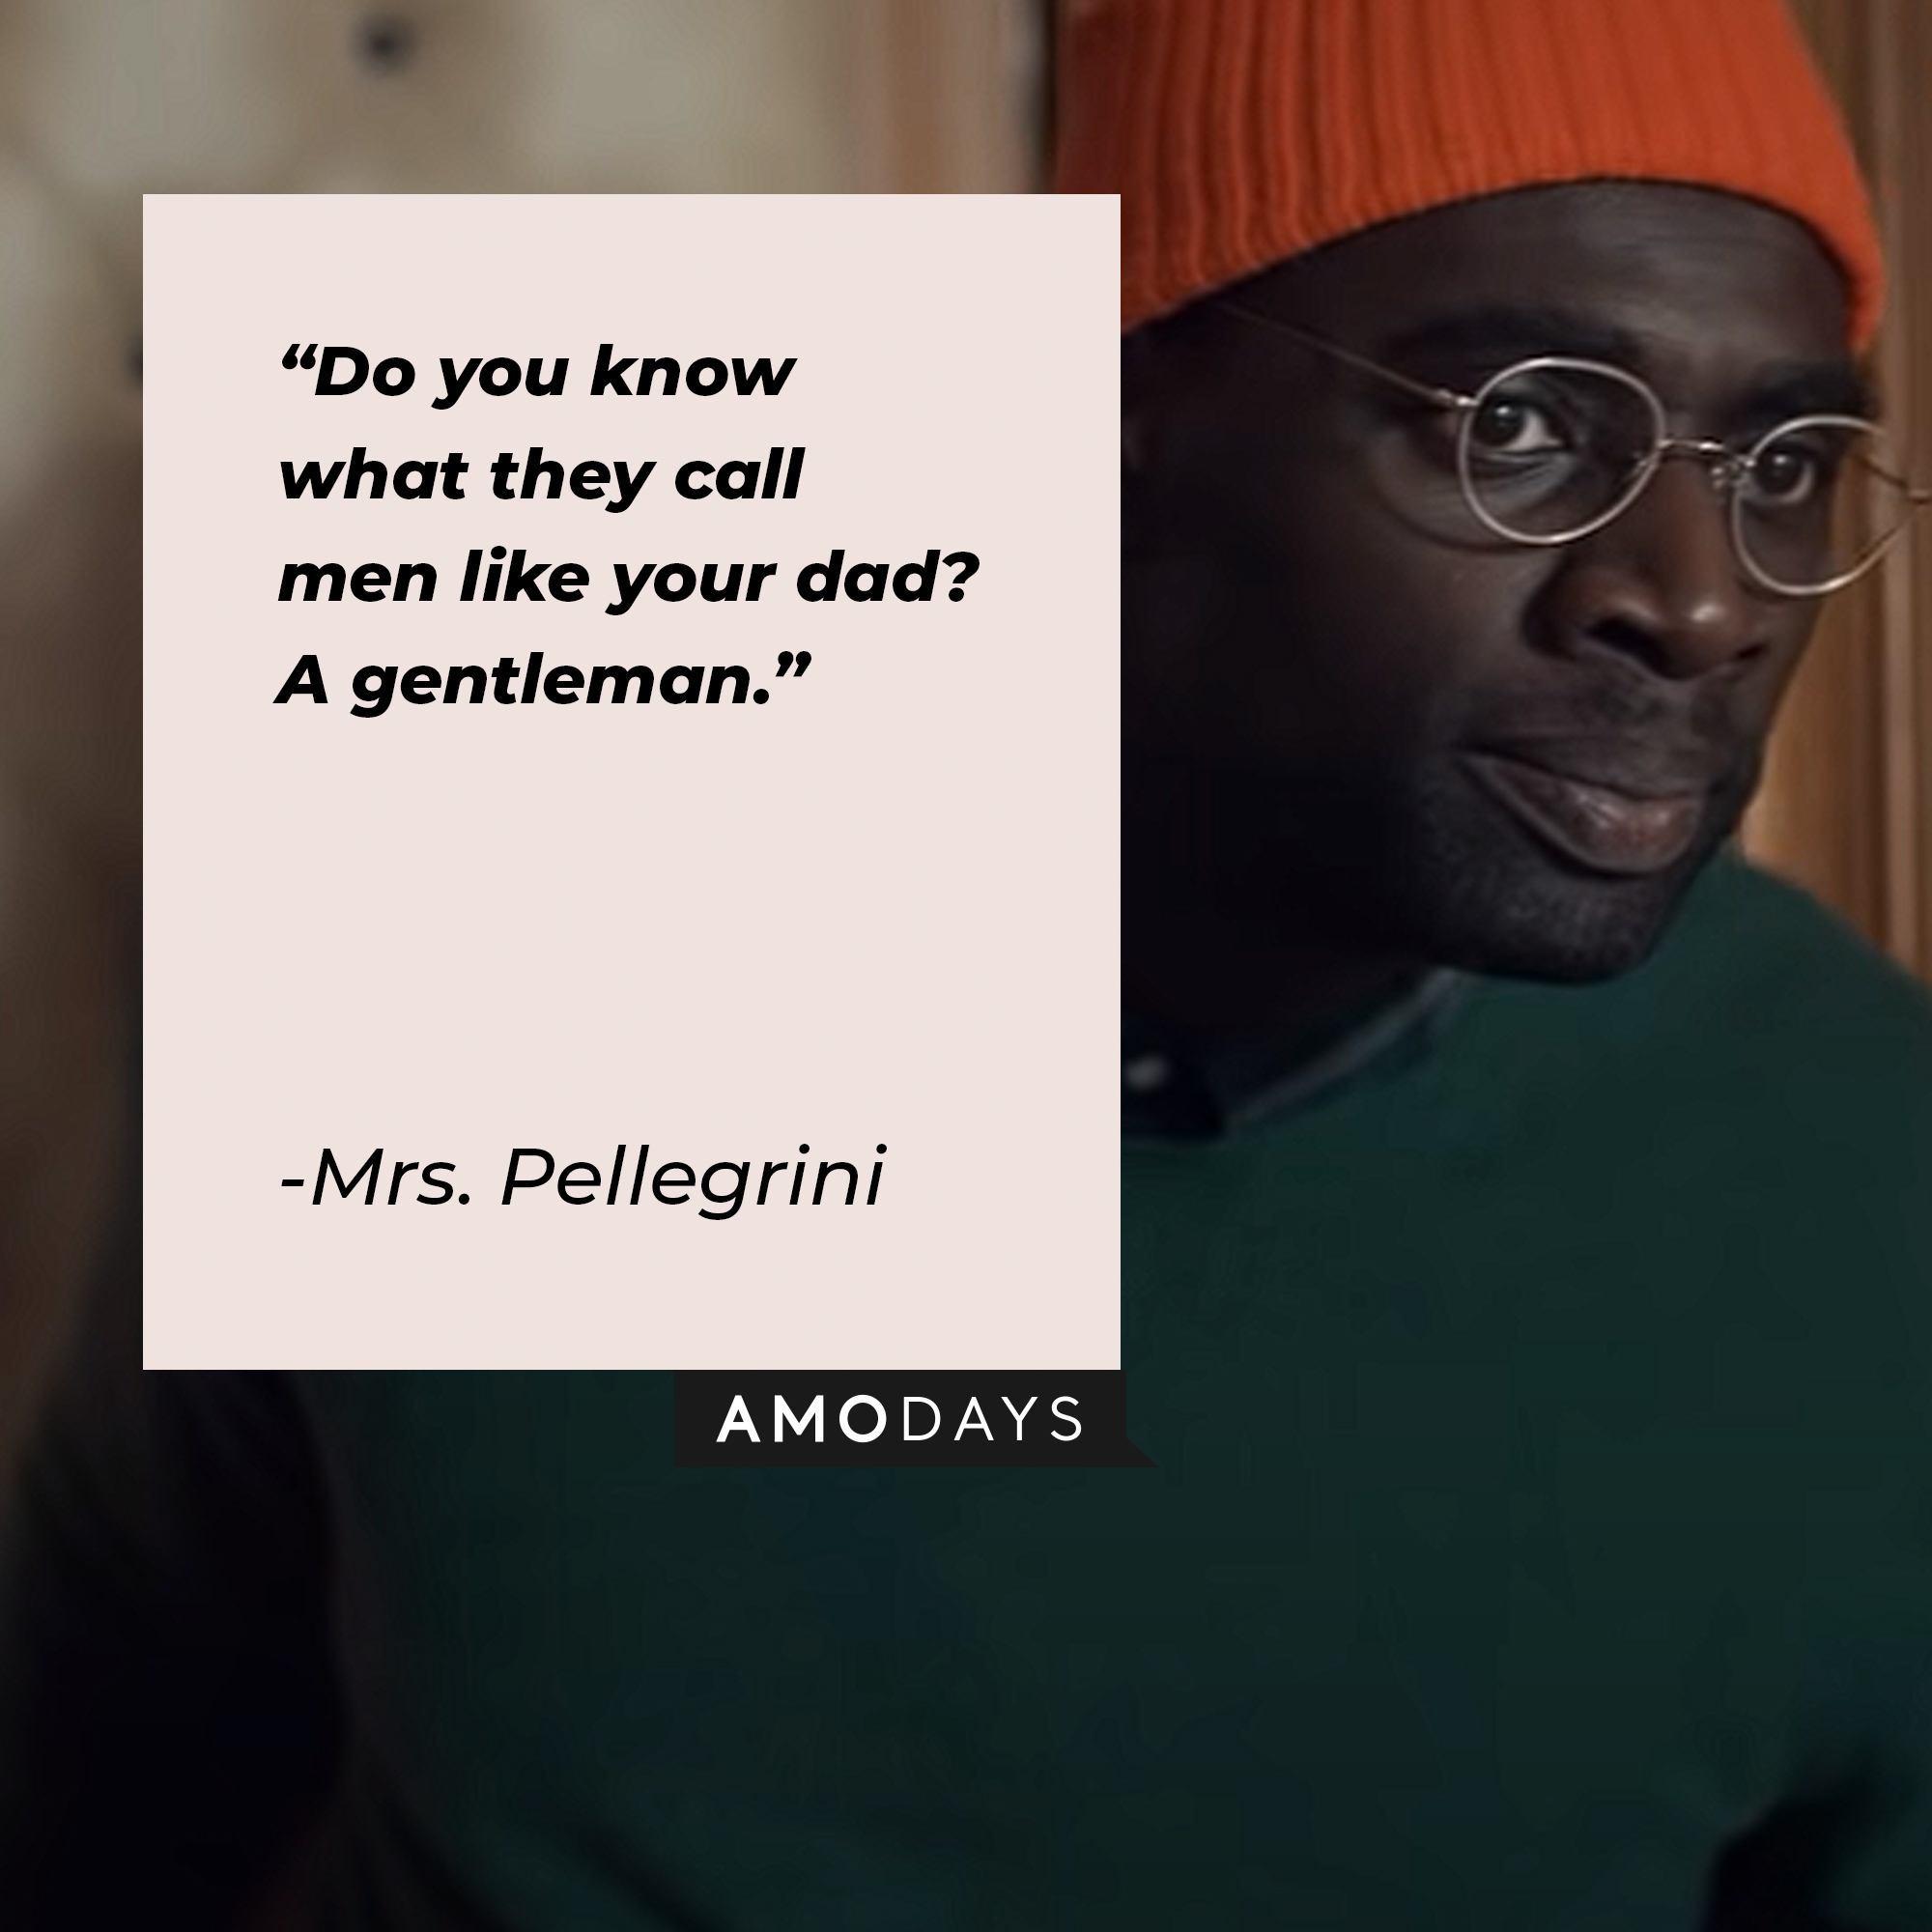 Mrs. Pellegrini's quote: "Do you know what they call men like your dad? A gentleman." | Image: Amodays